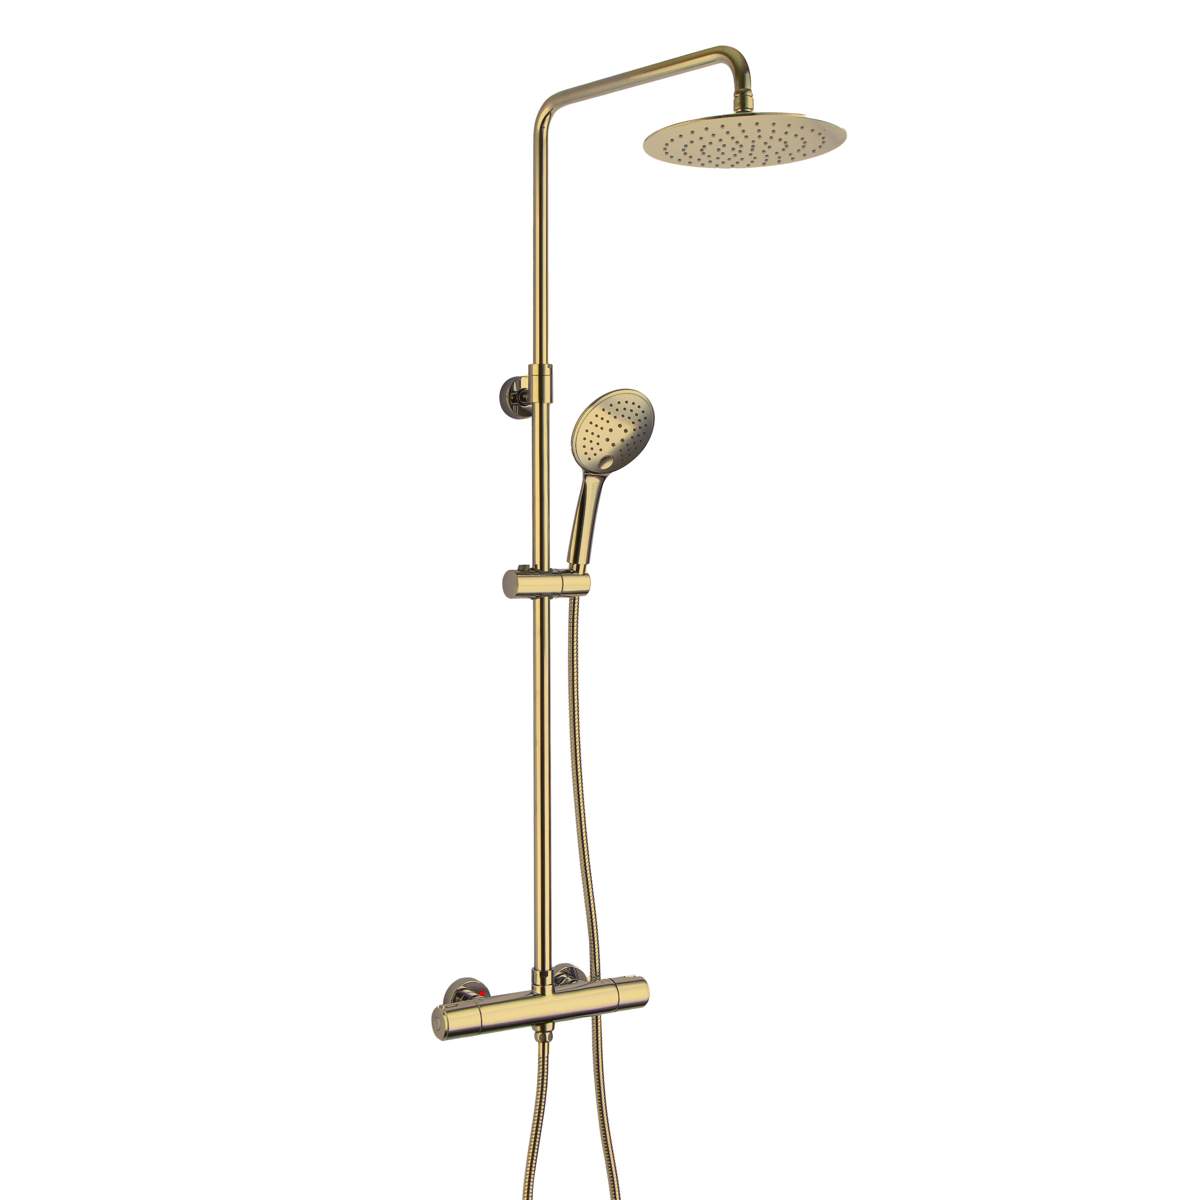 JTP Vos Brushed Brass Thermostatic Bar Valve with 2 Outlets, Adjustable Riser and Cool Touch Shower Kit (239081BBR)